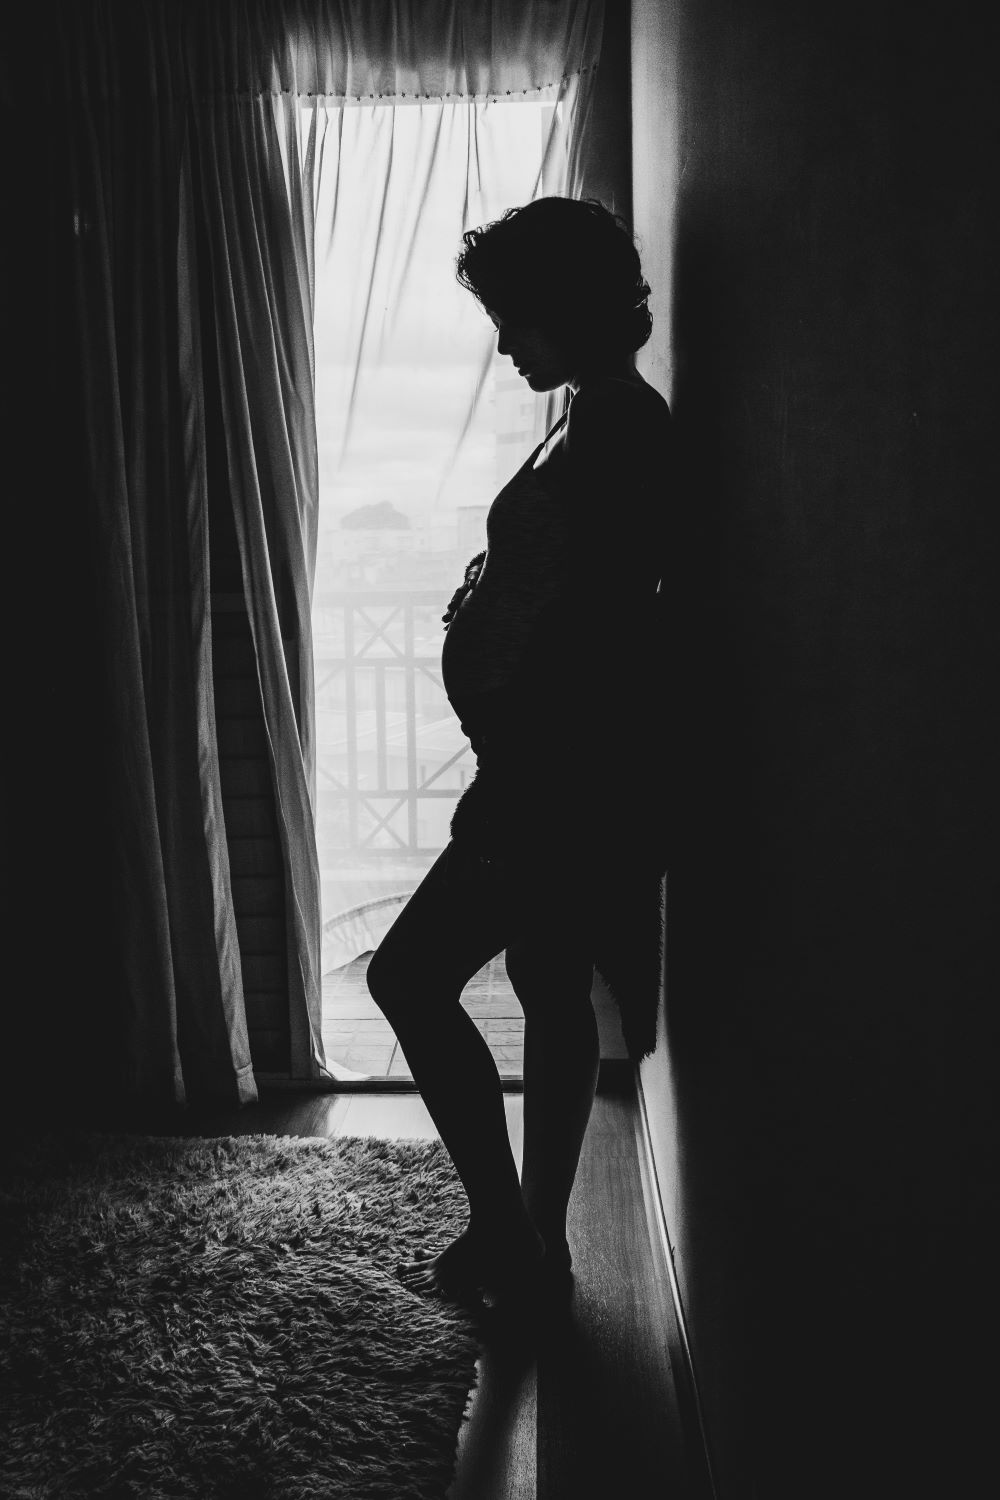 States are Not Providing Adequate Mental Health Care to New Mothers